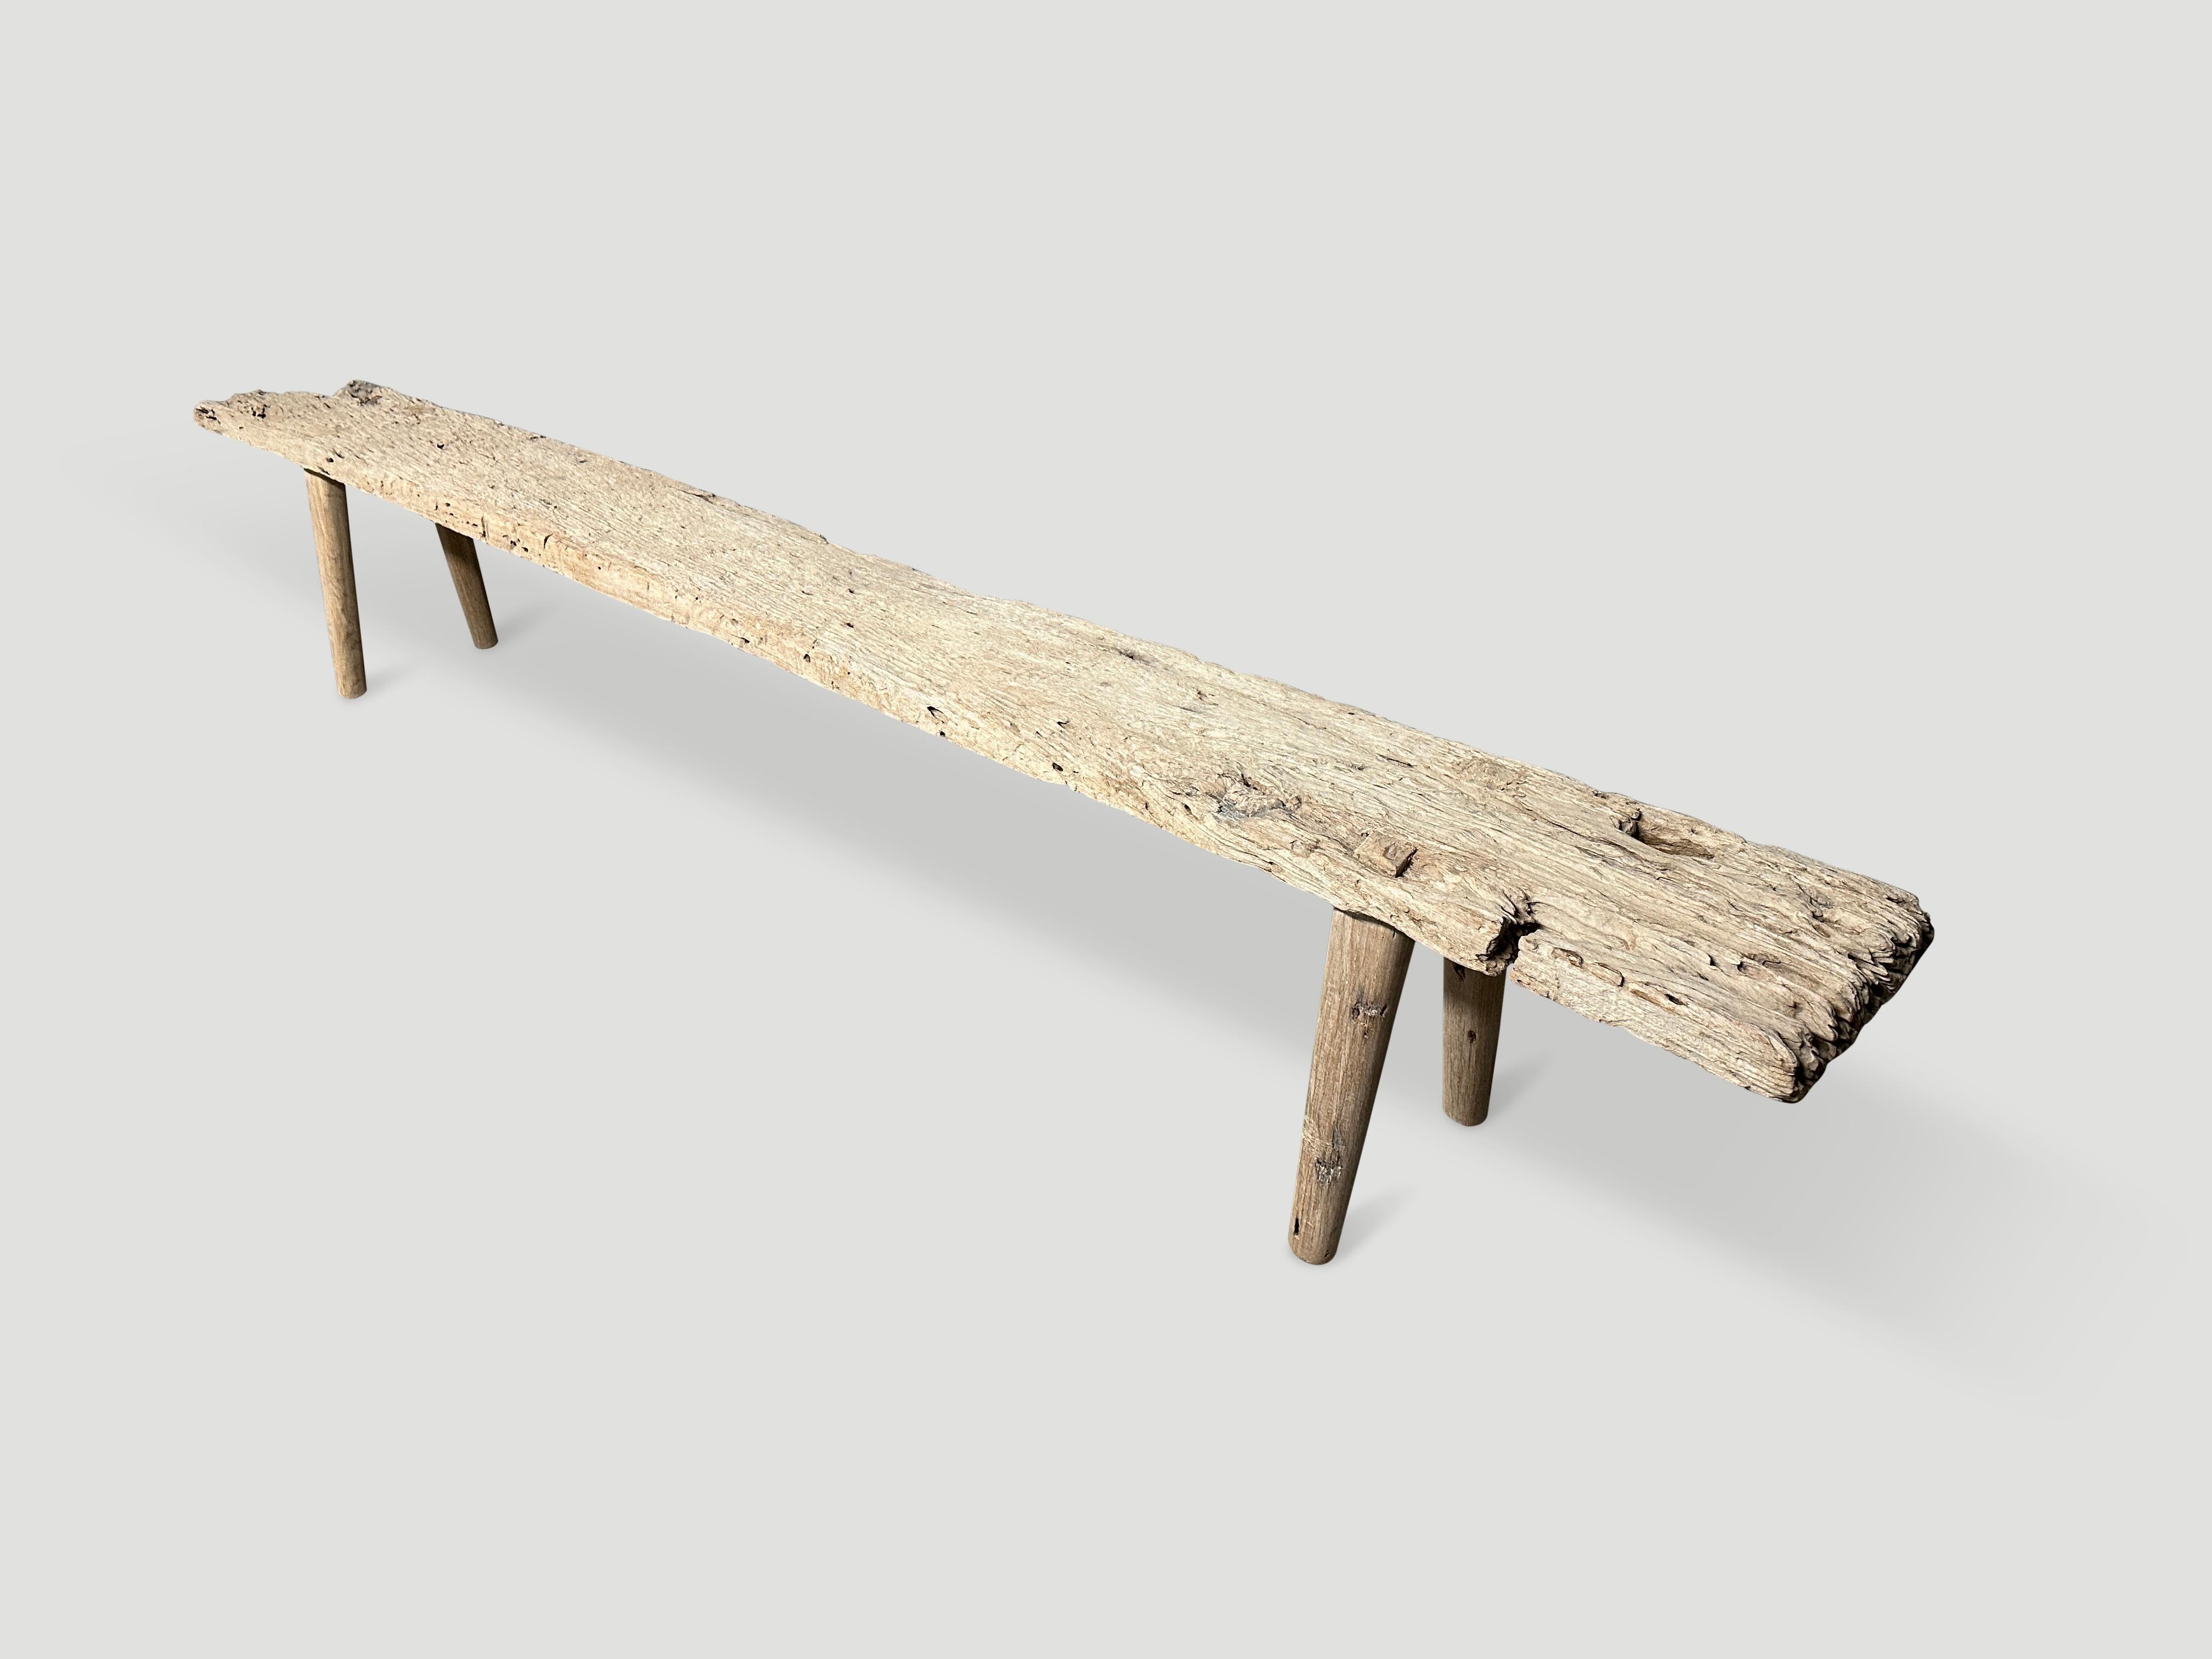 We added smooth teak minimalist legs, in contrast to this impressive ancient single wood panel with beautiful erosion detail. Circa 1900. 

This bench was handmade in the spirit of Wabi-Sabi, a Japanese philosophy that beauty can be found in